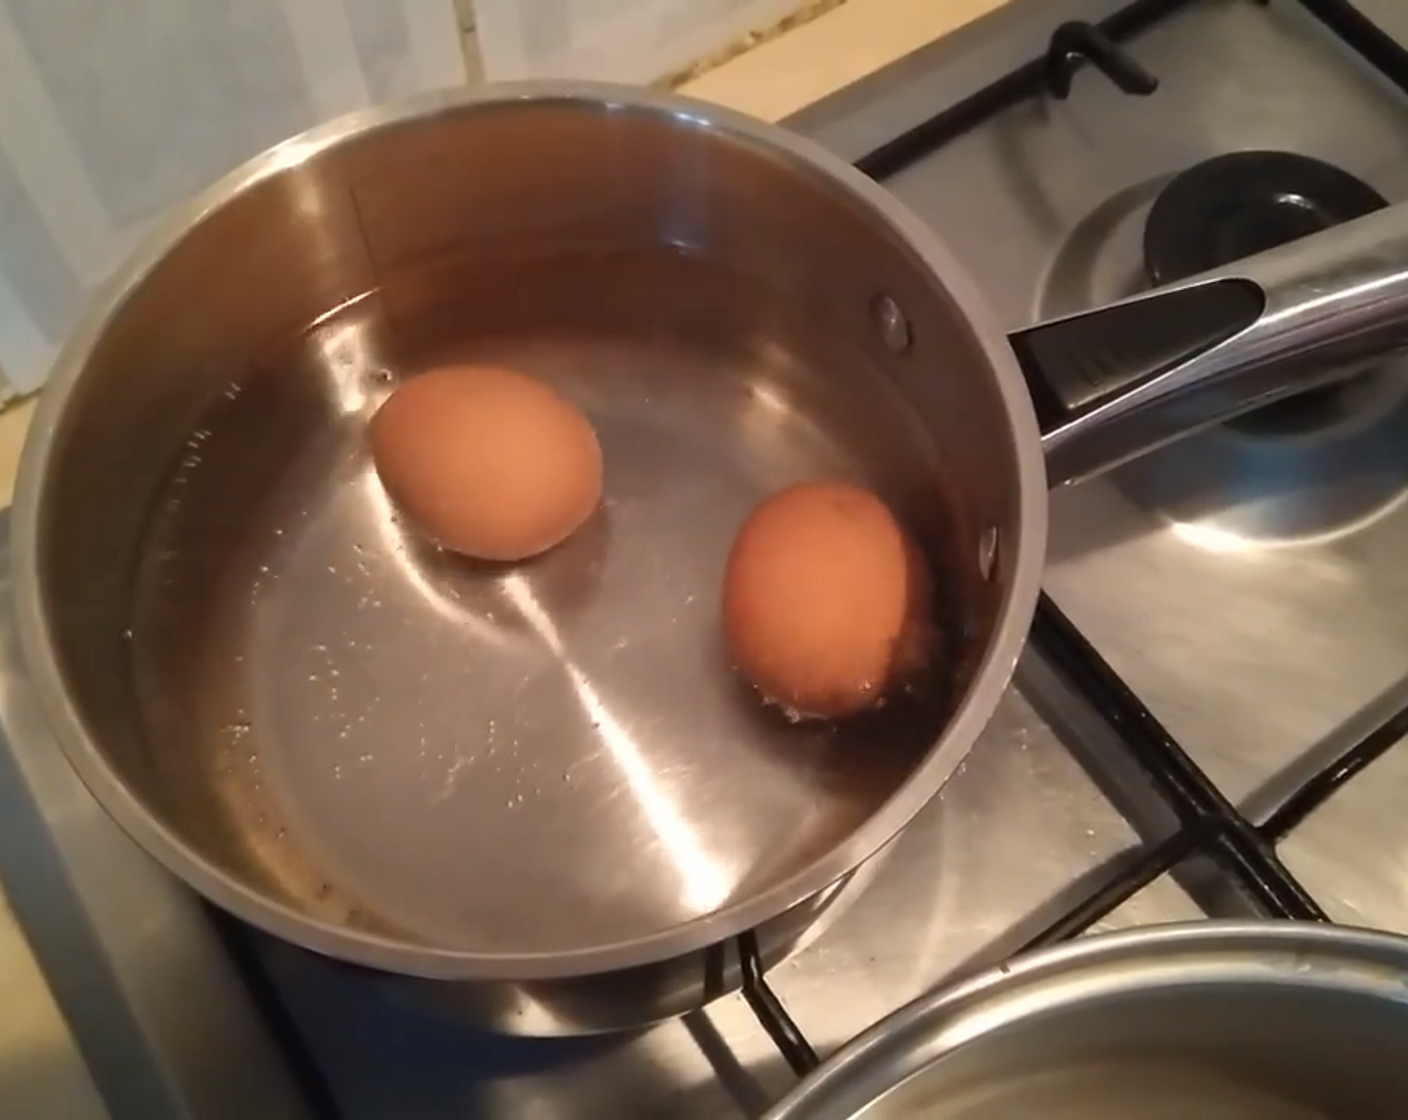 step 2 In a pot with boiling water add the Eggs (2) and cook them for 10 minutes.